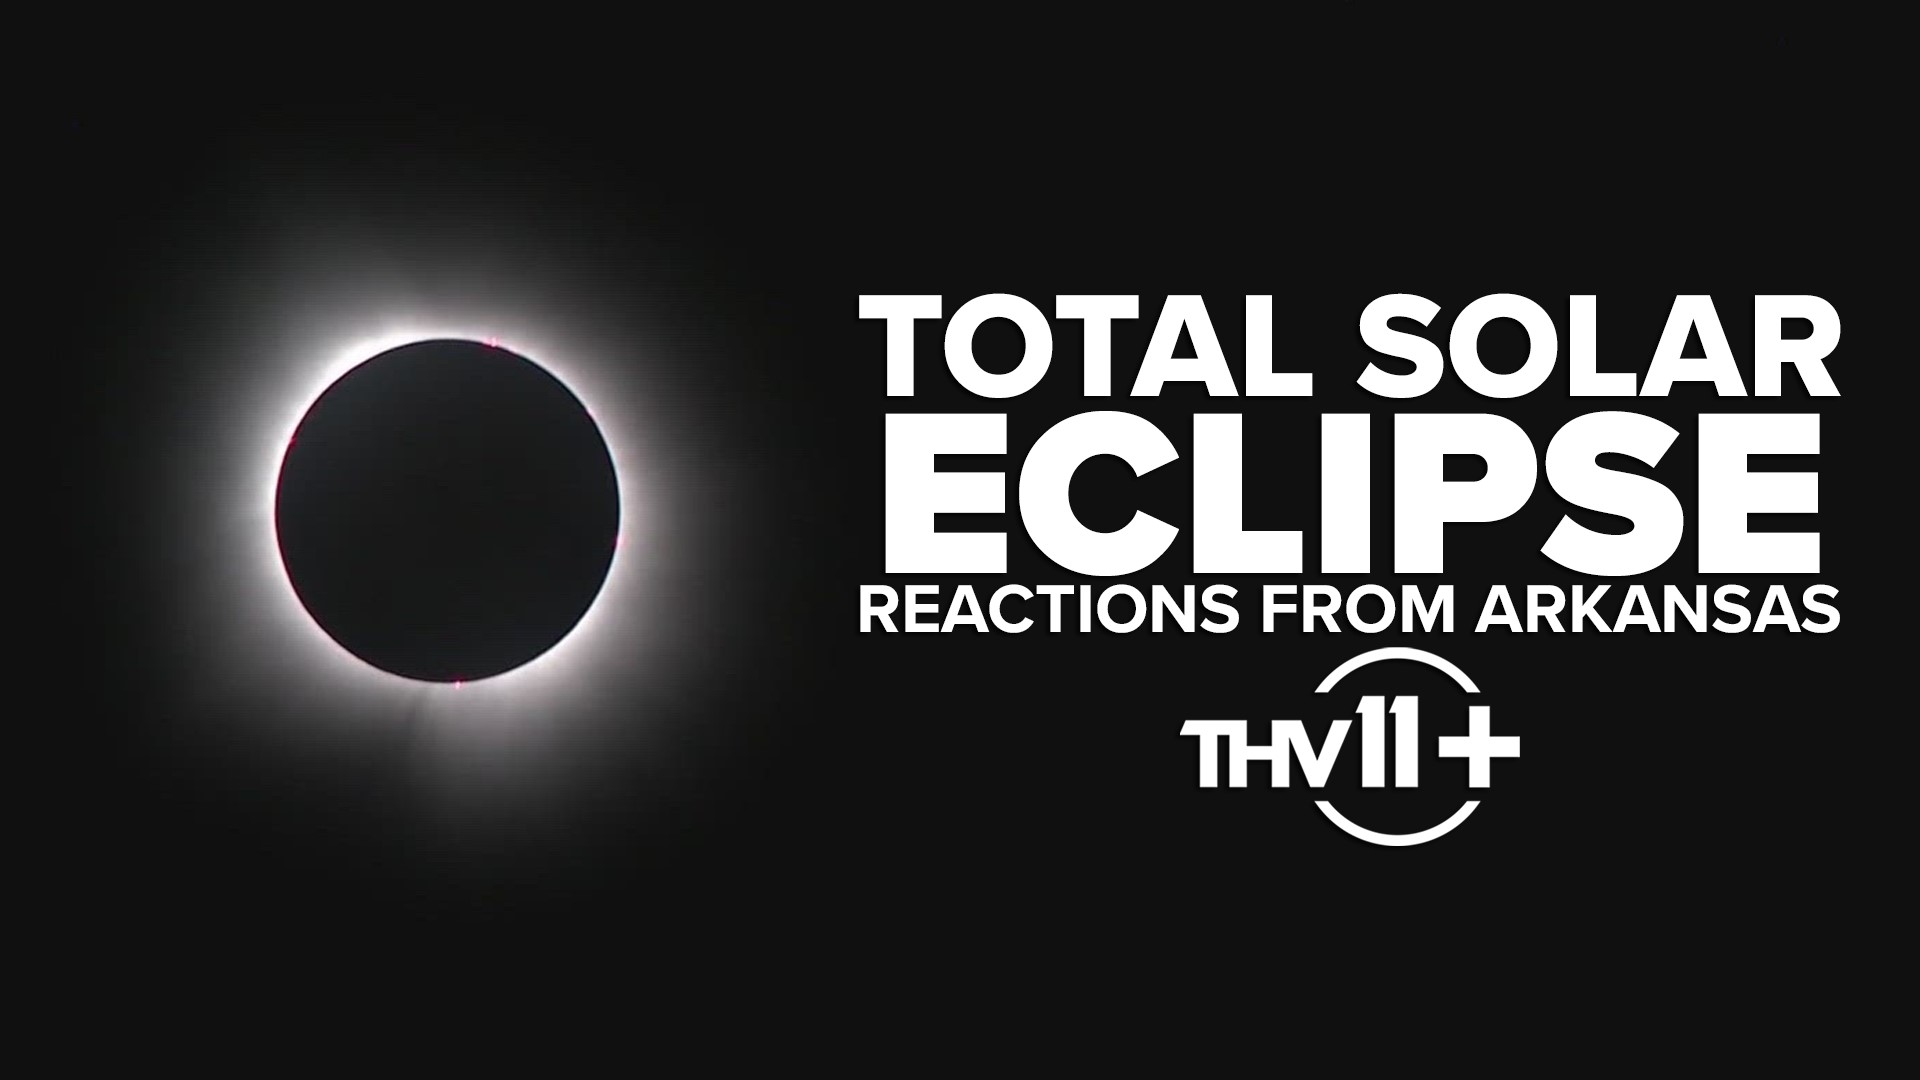 The 2024 total solar eclipse as seen from Arkansas THV11